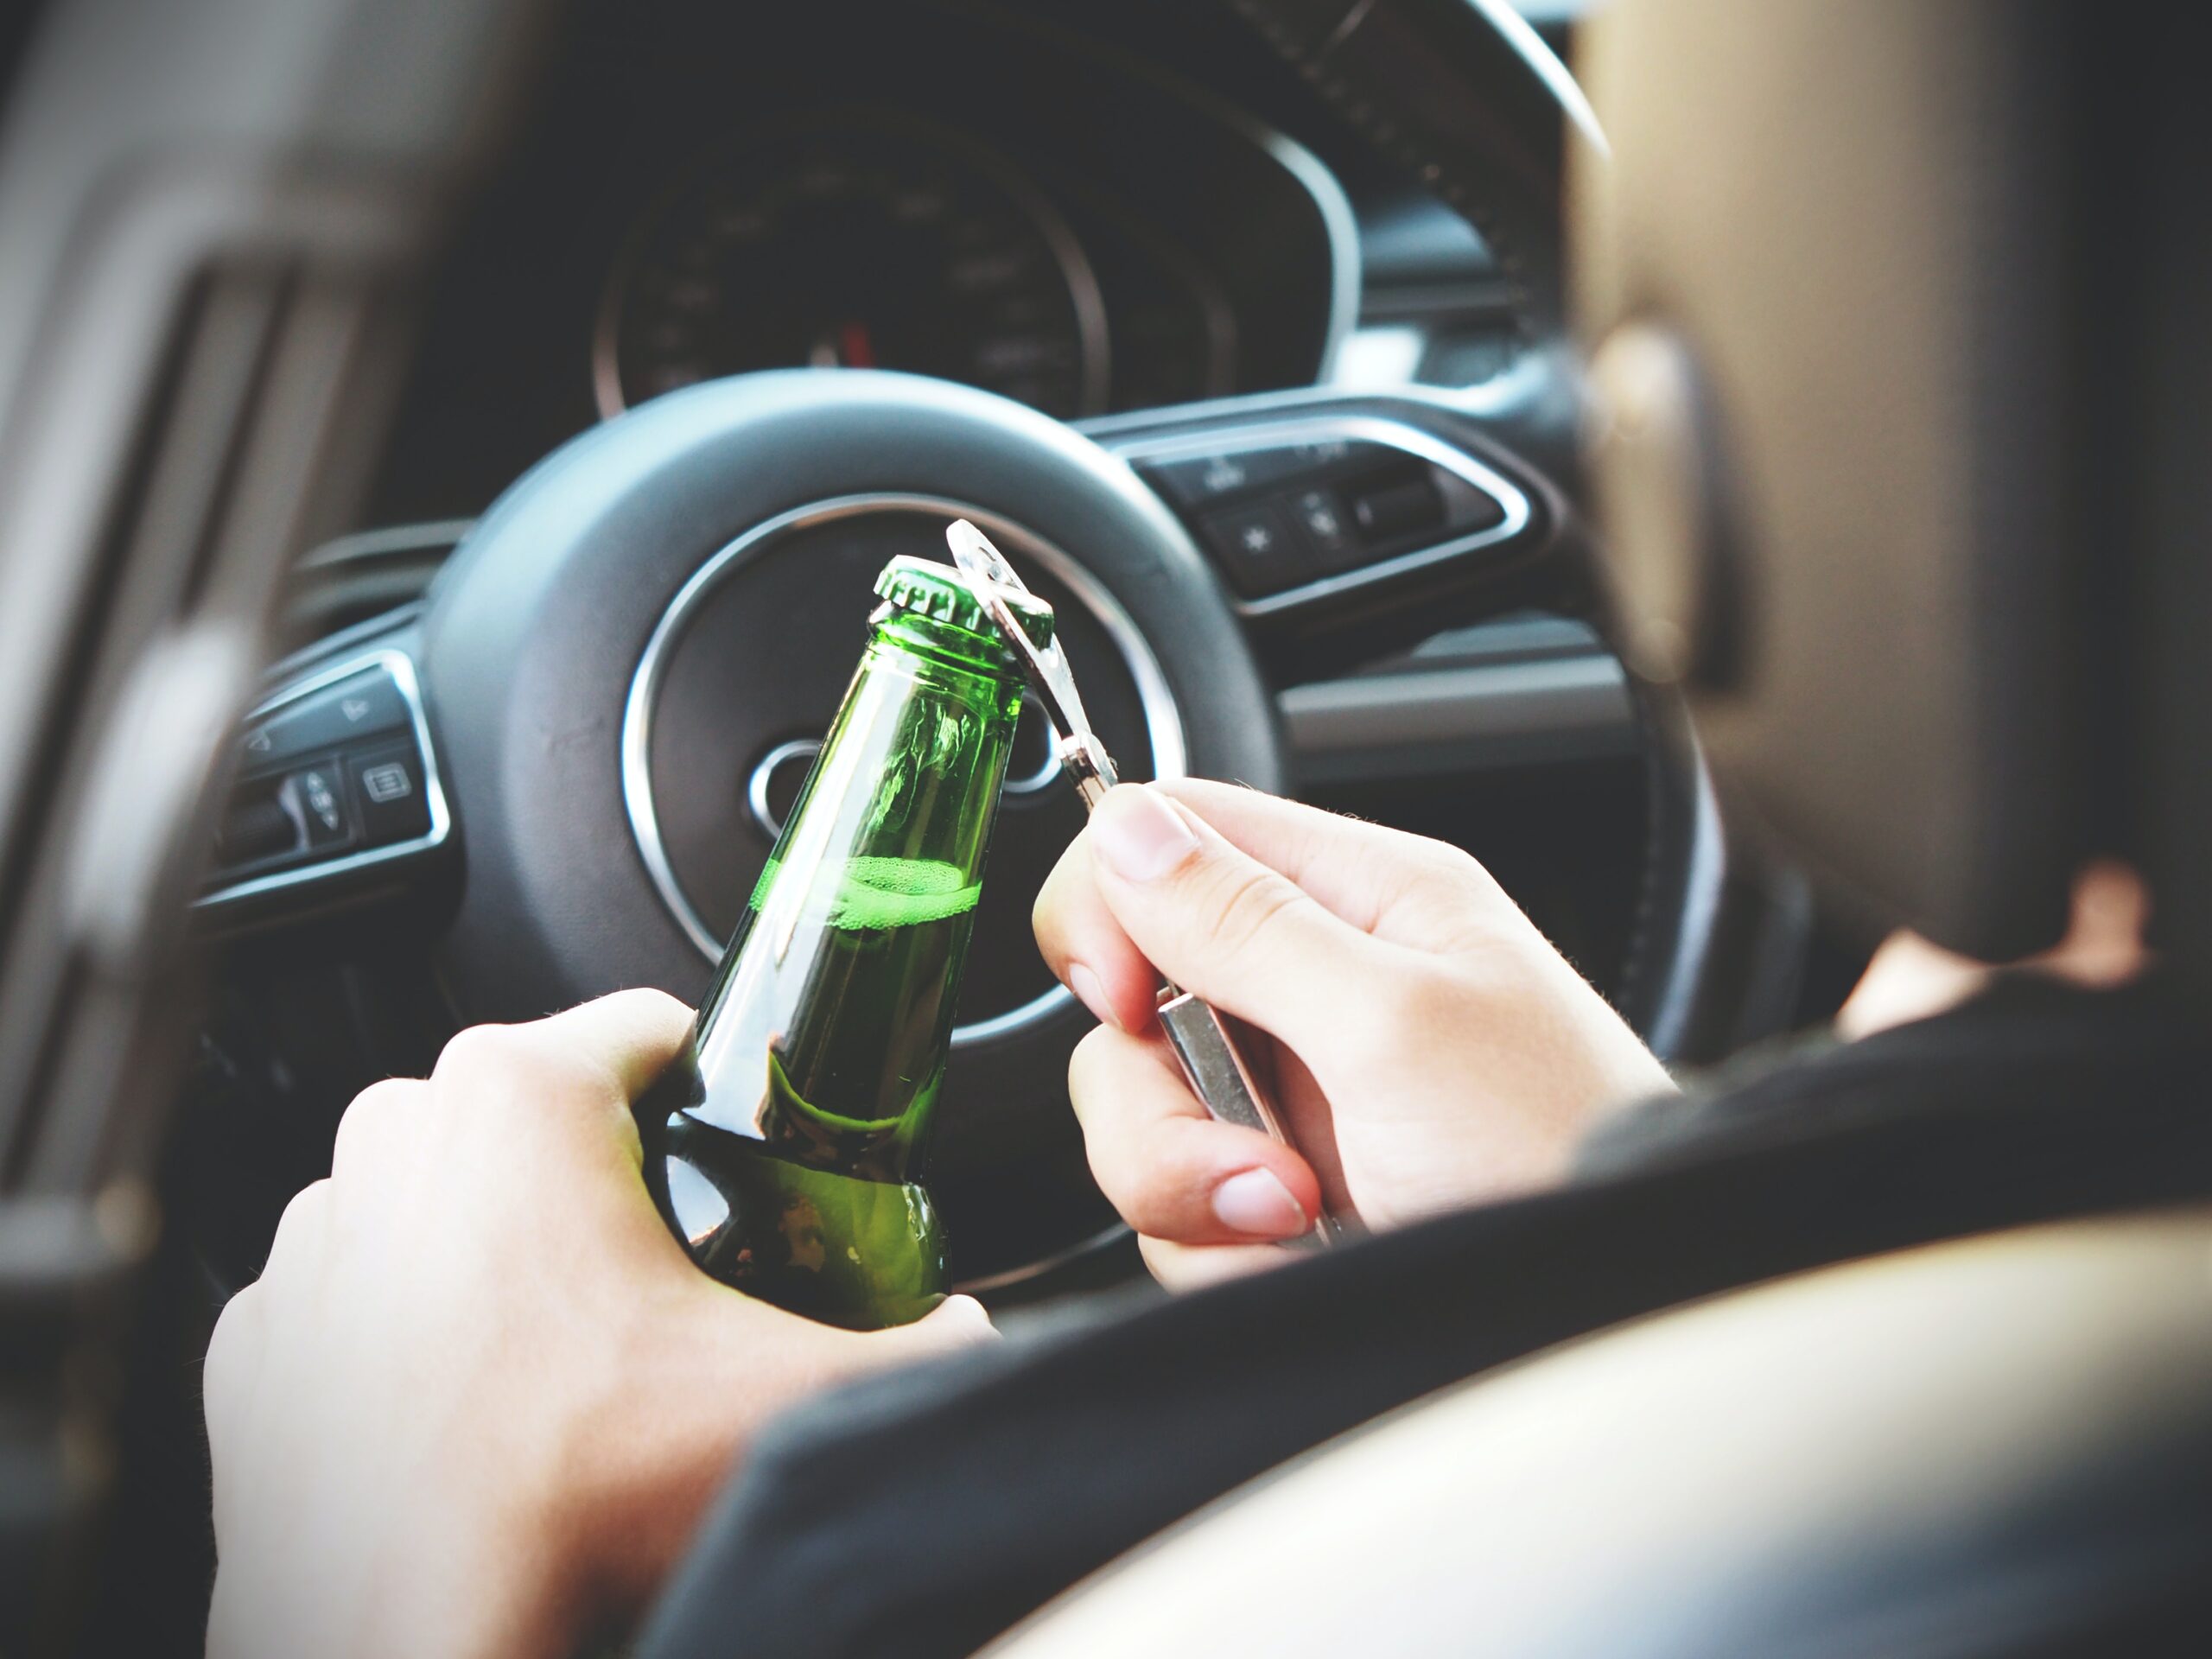 Penalties for drinking alcohol while driving in Vietnam